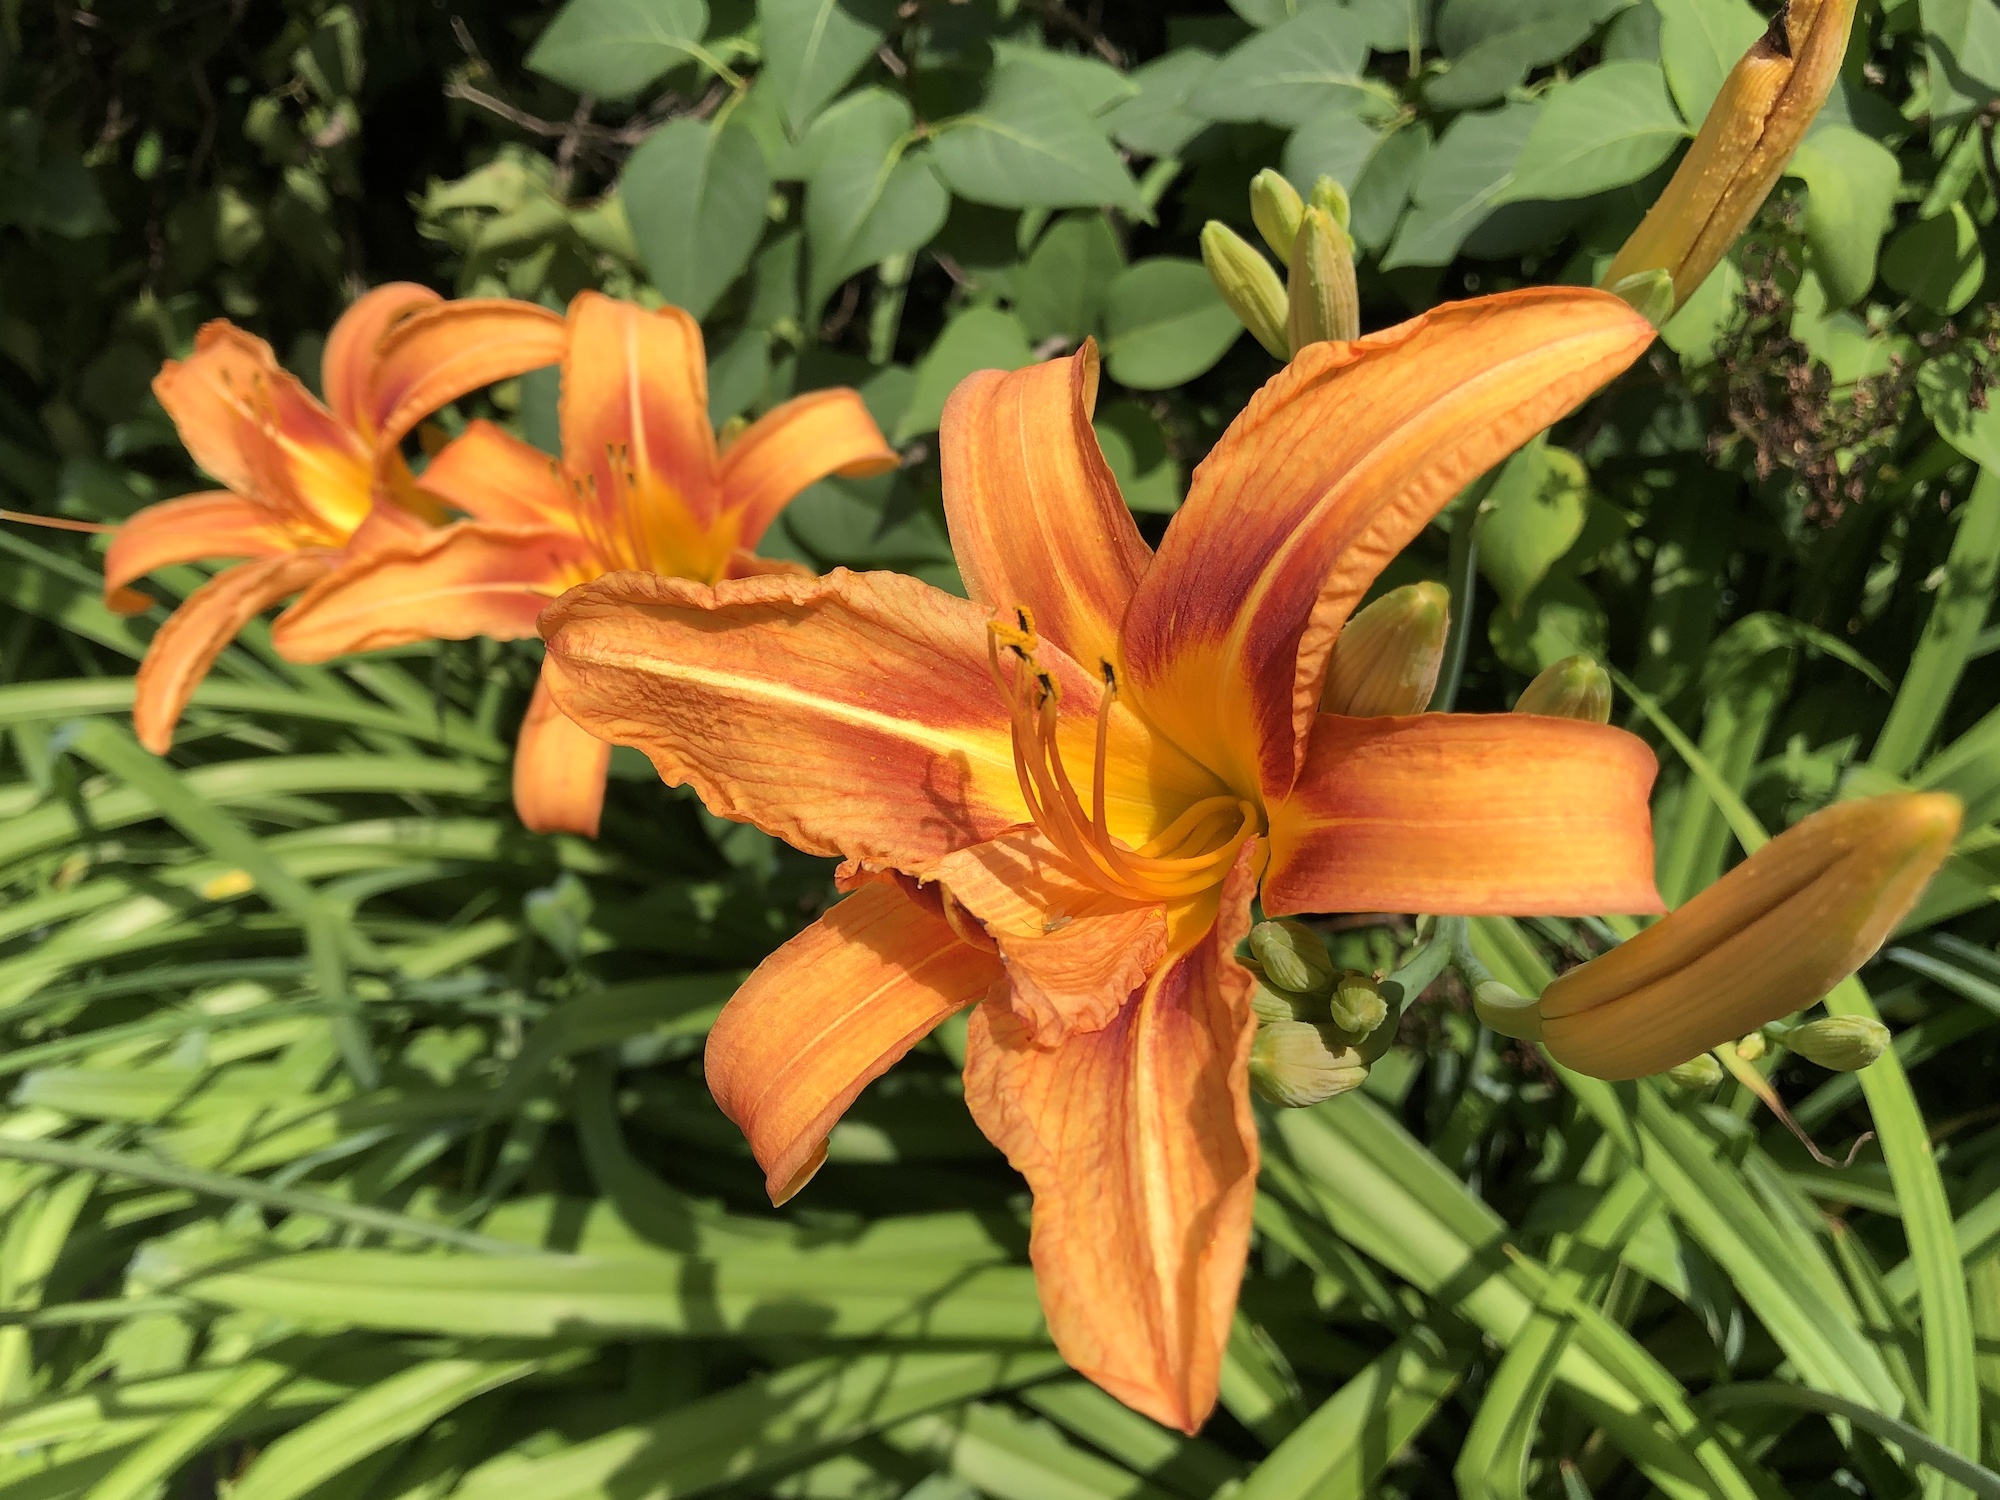 Orange Day Lily in Nakoma yard in Madison, Wisconsin on June 30, 2020.